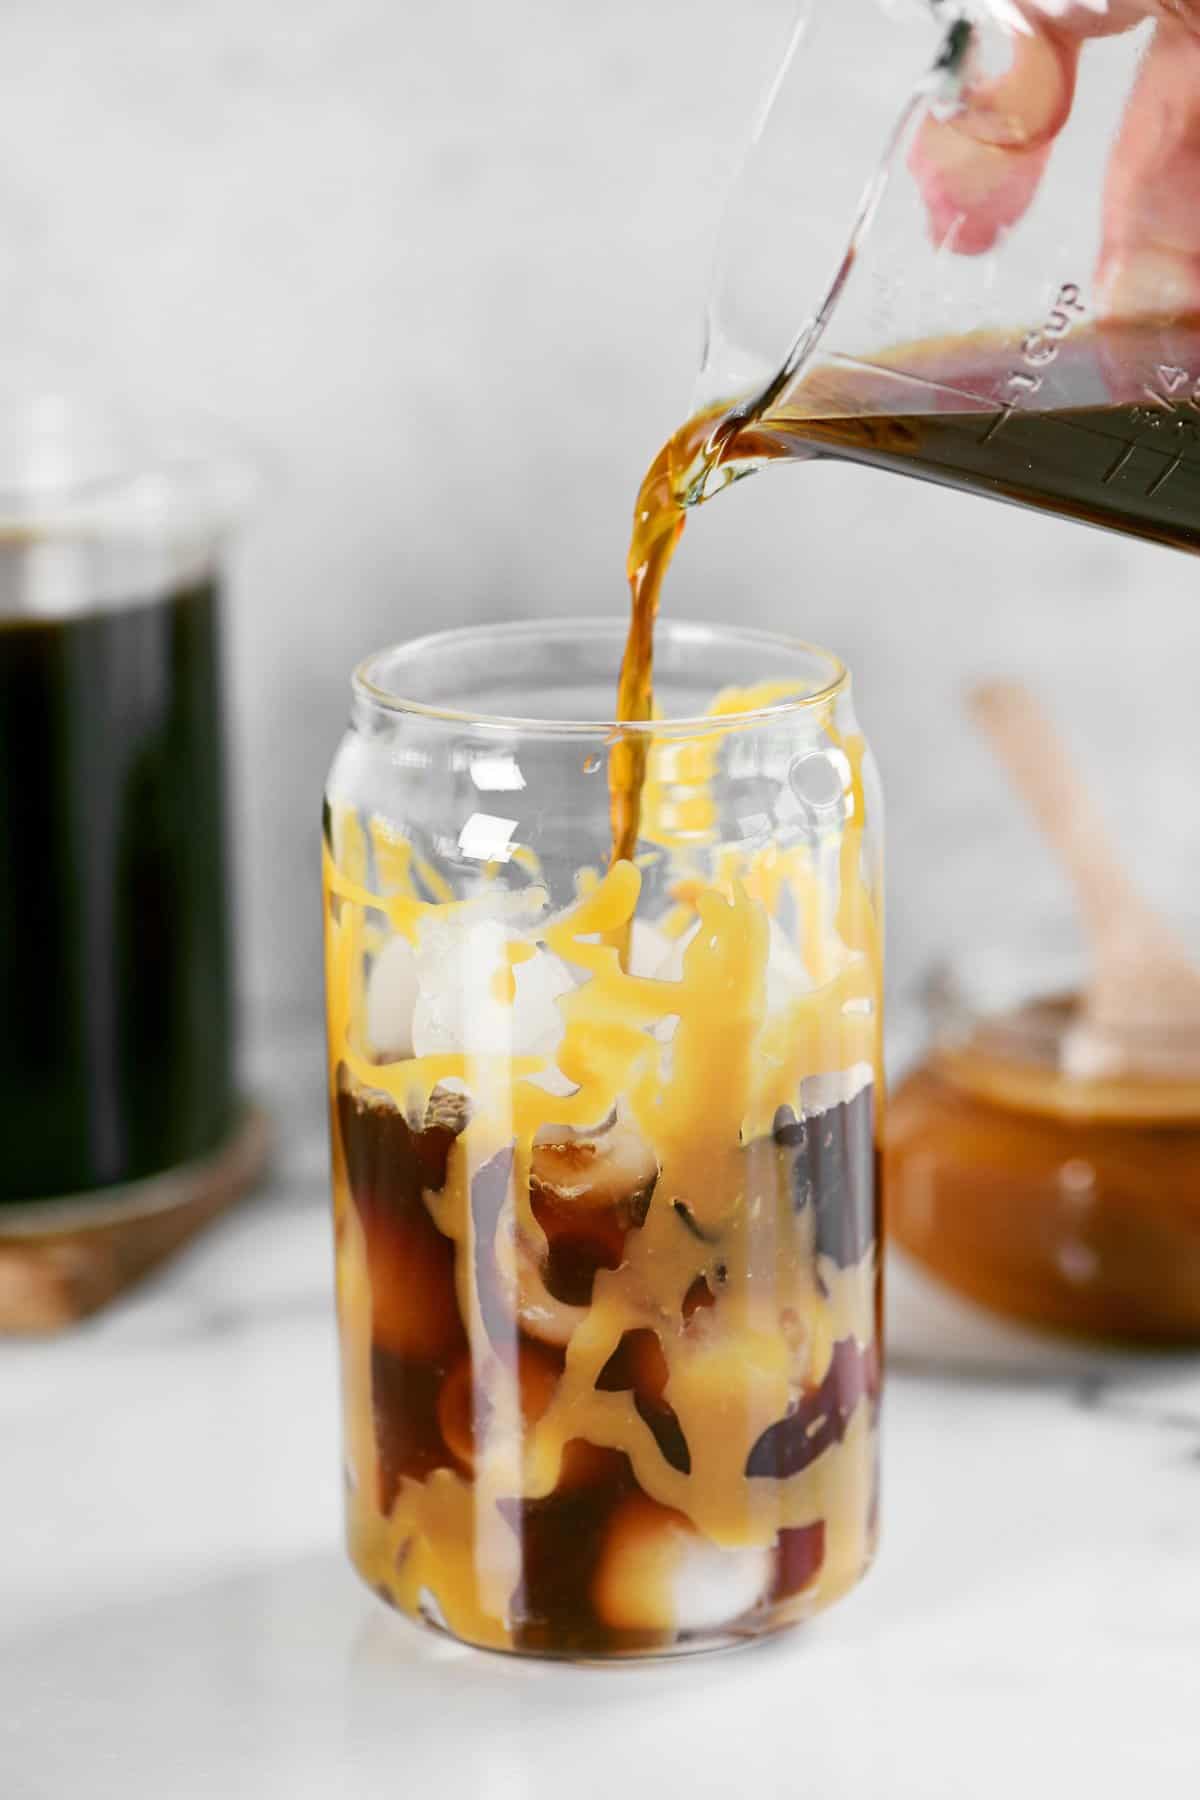 https://www.thegunnysack.com/wp-content/uploads/2022/05/Iced-Caramel-Cold-Brew-Coffee-Pour.jpg